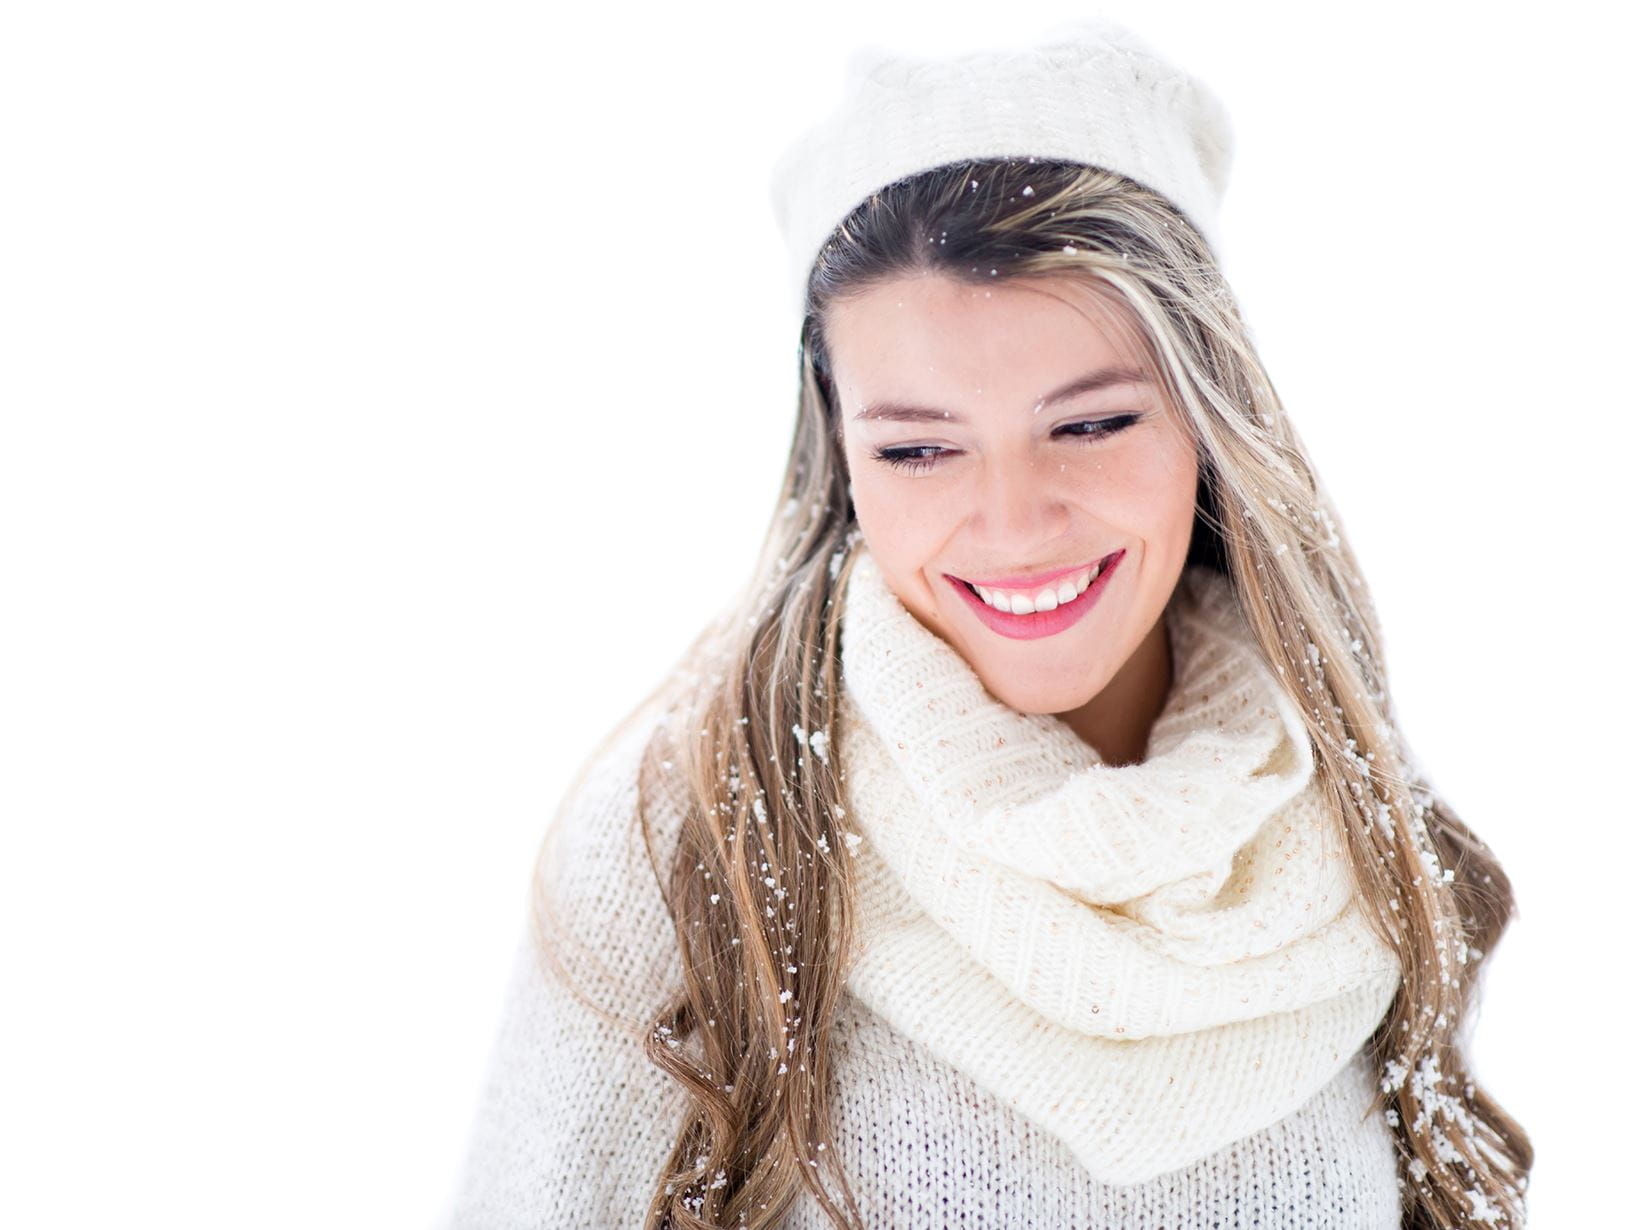 View of a female model wearing a white hat and scarf and a grey sweater while smiling against a white background.